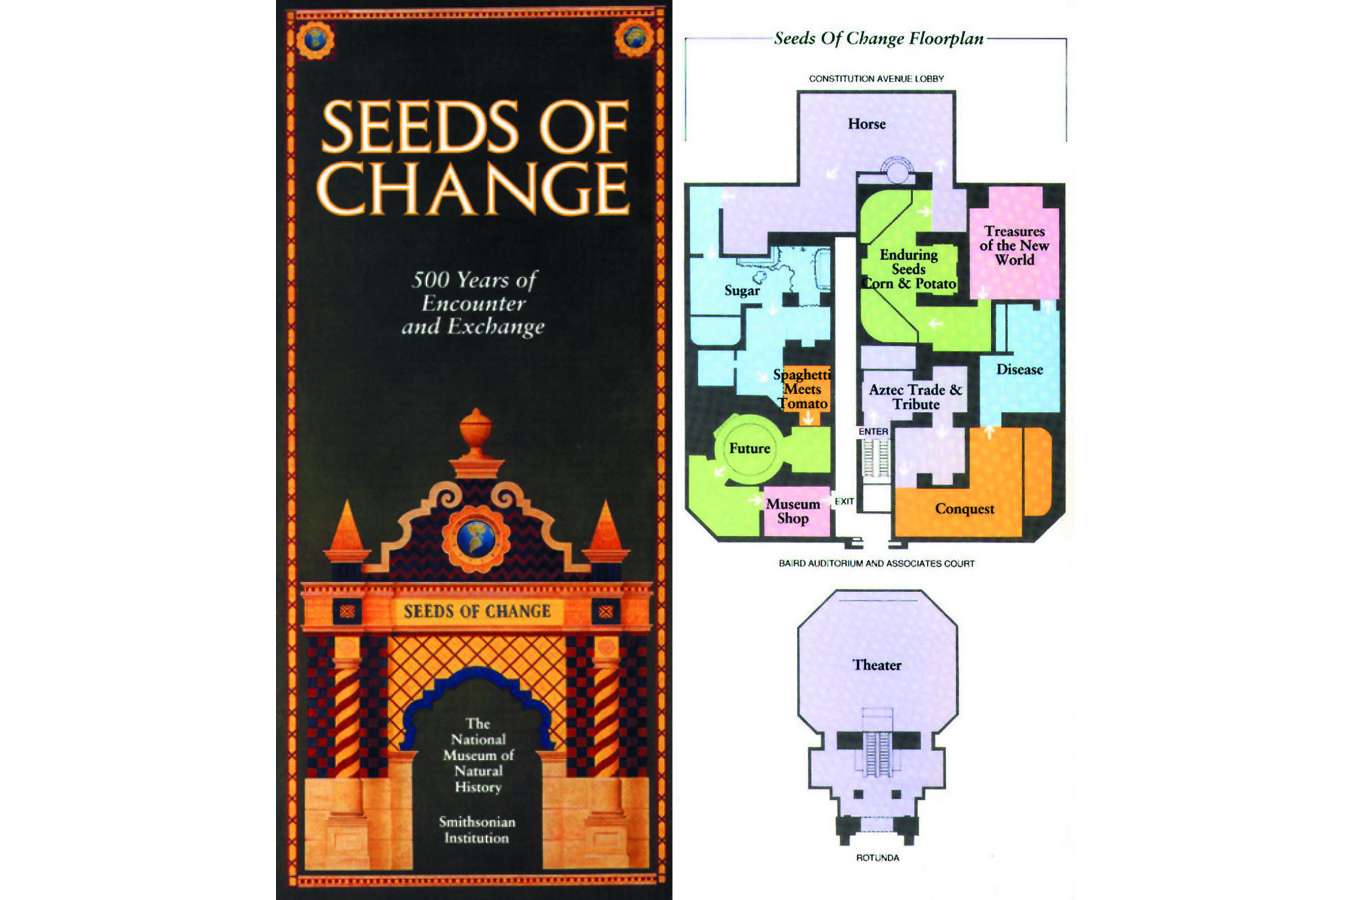 seeds guide : Exhibit guide showing layout of thematic areas